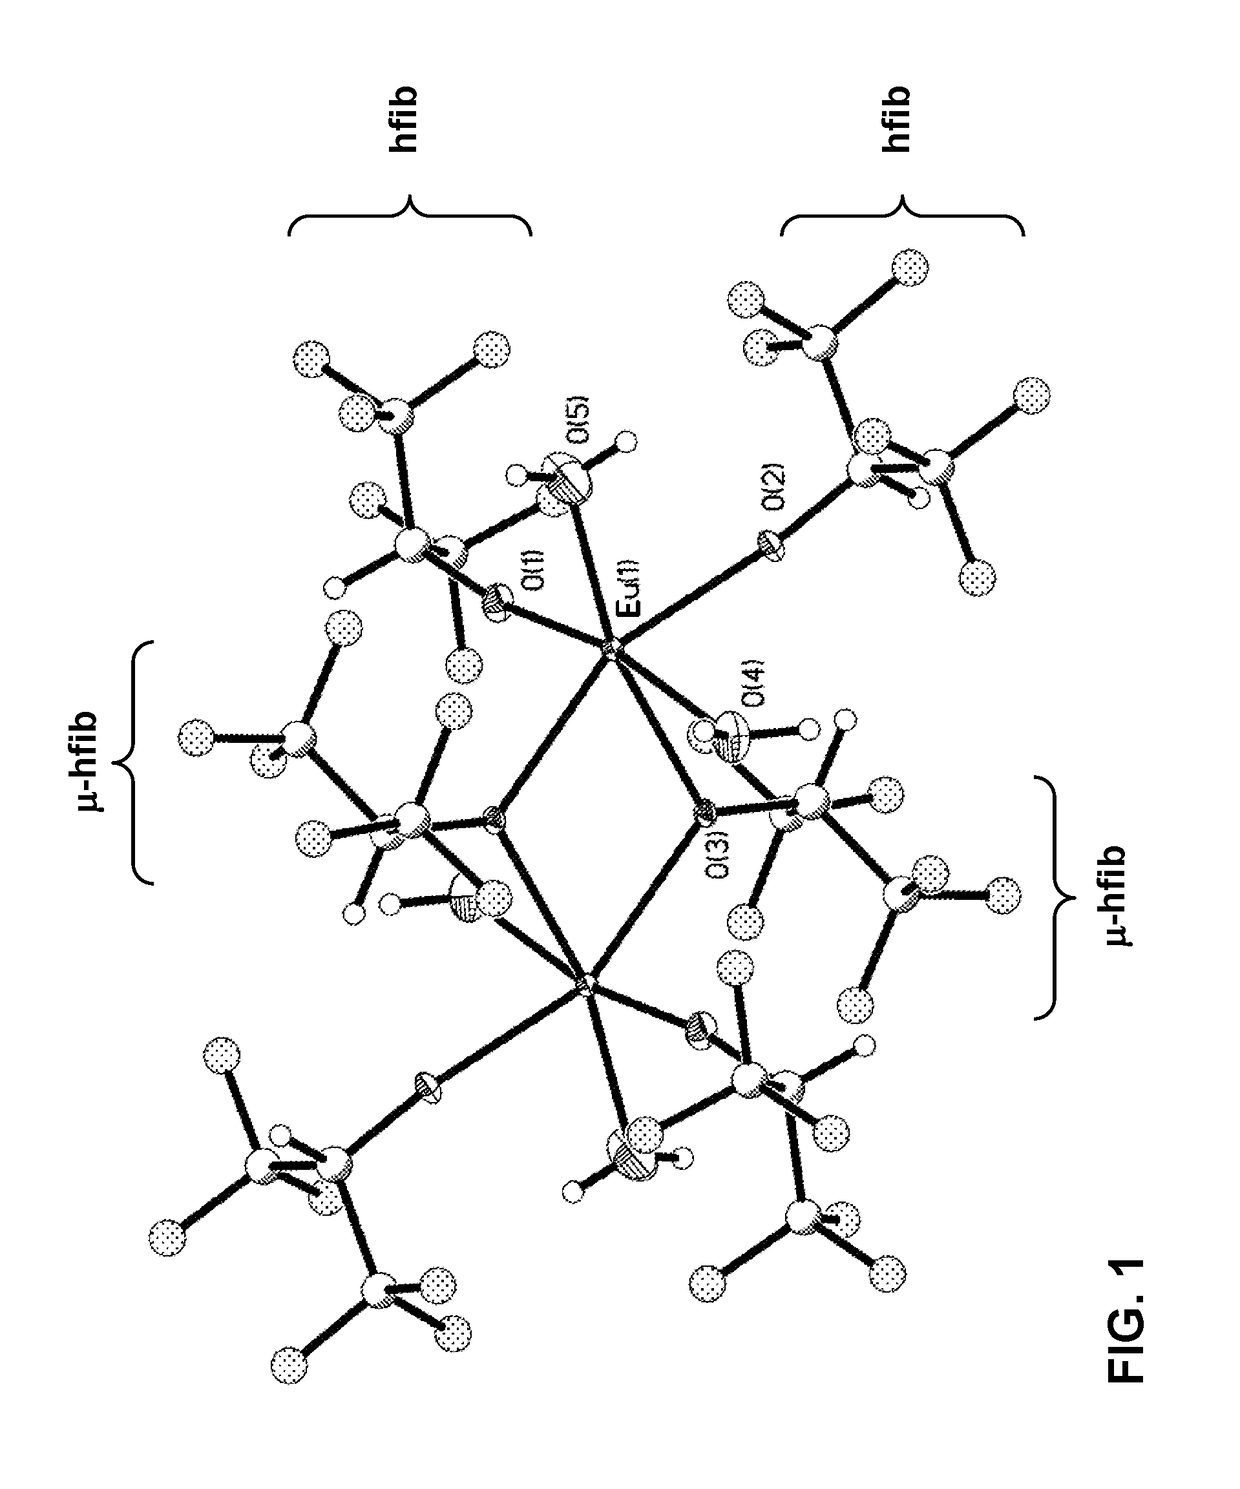 Method to synthesize lanthanide fluoride materials from lanthanide fluorinated alkoxides